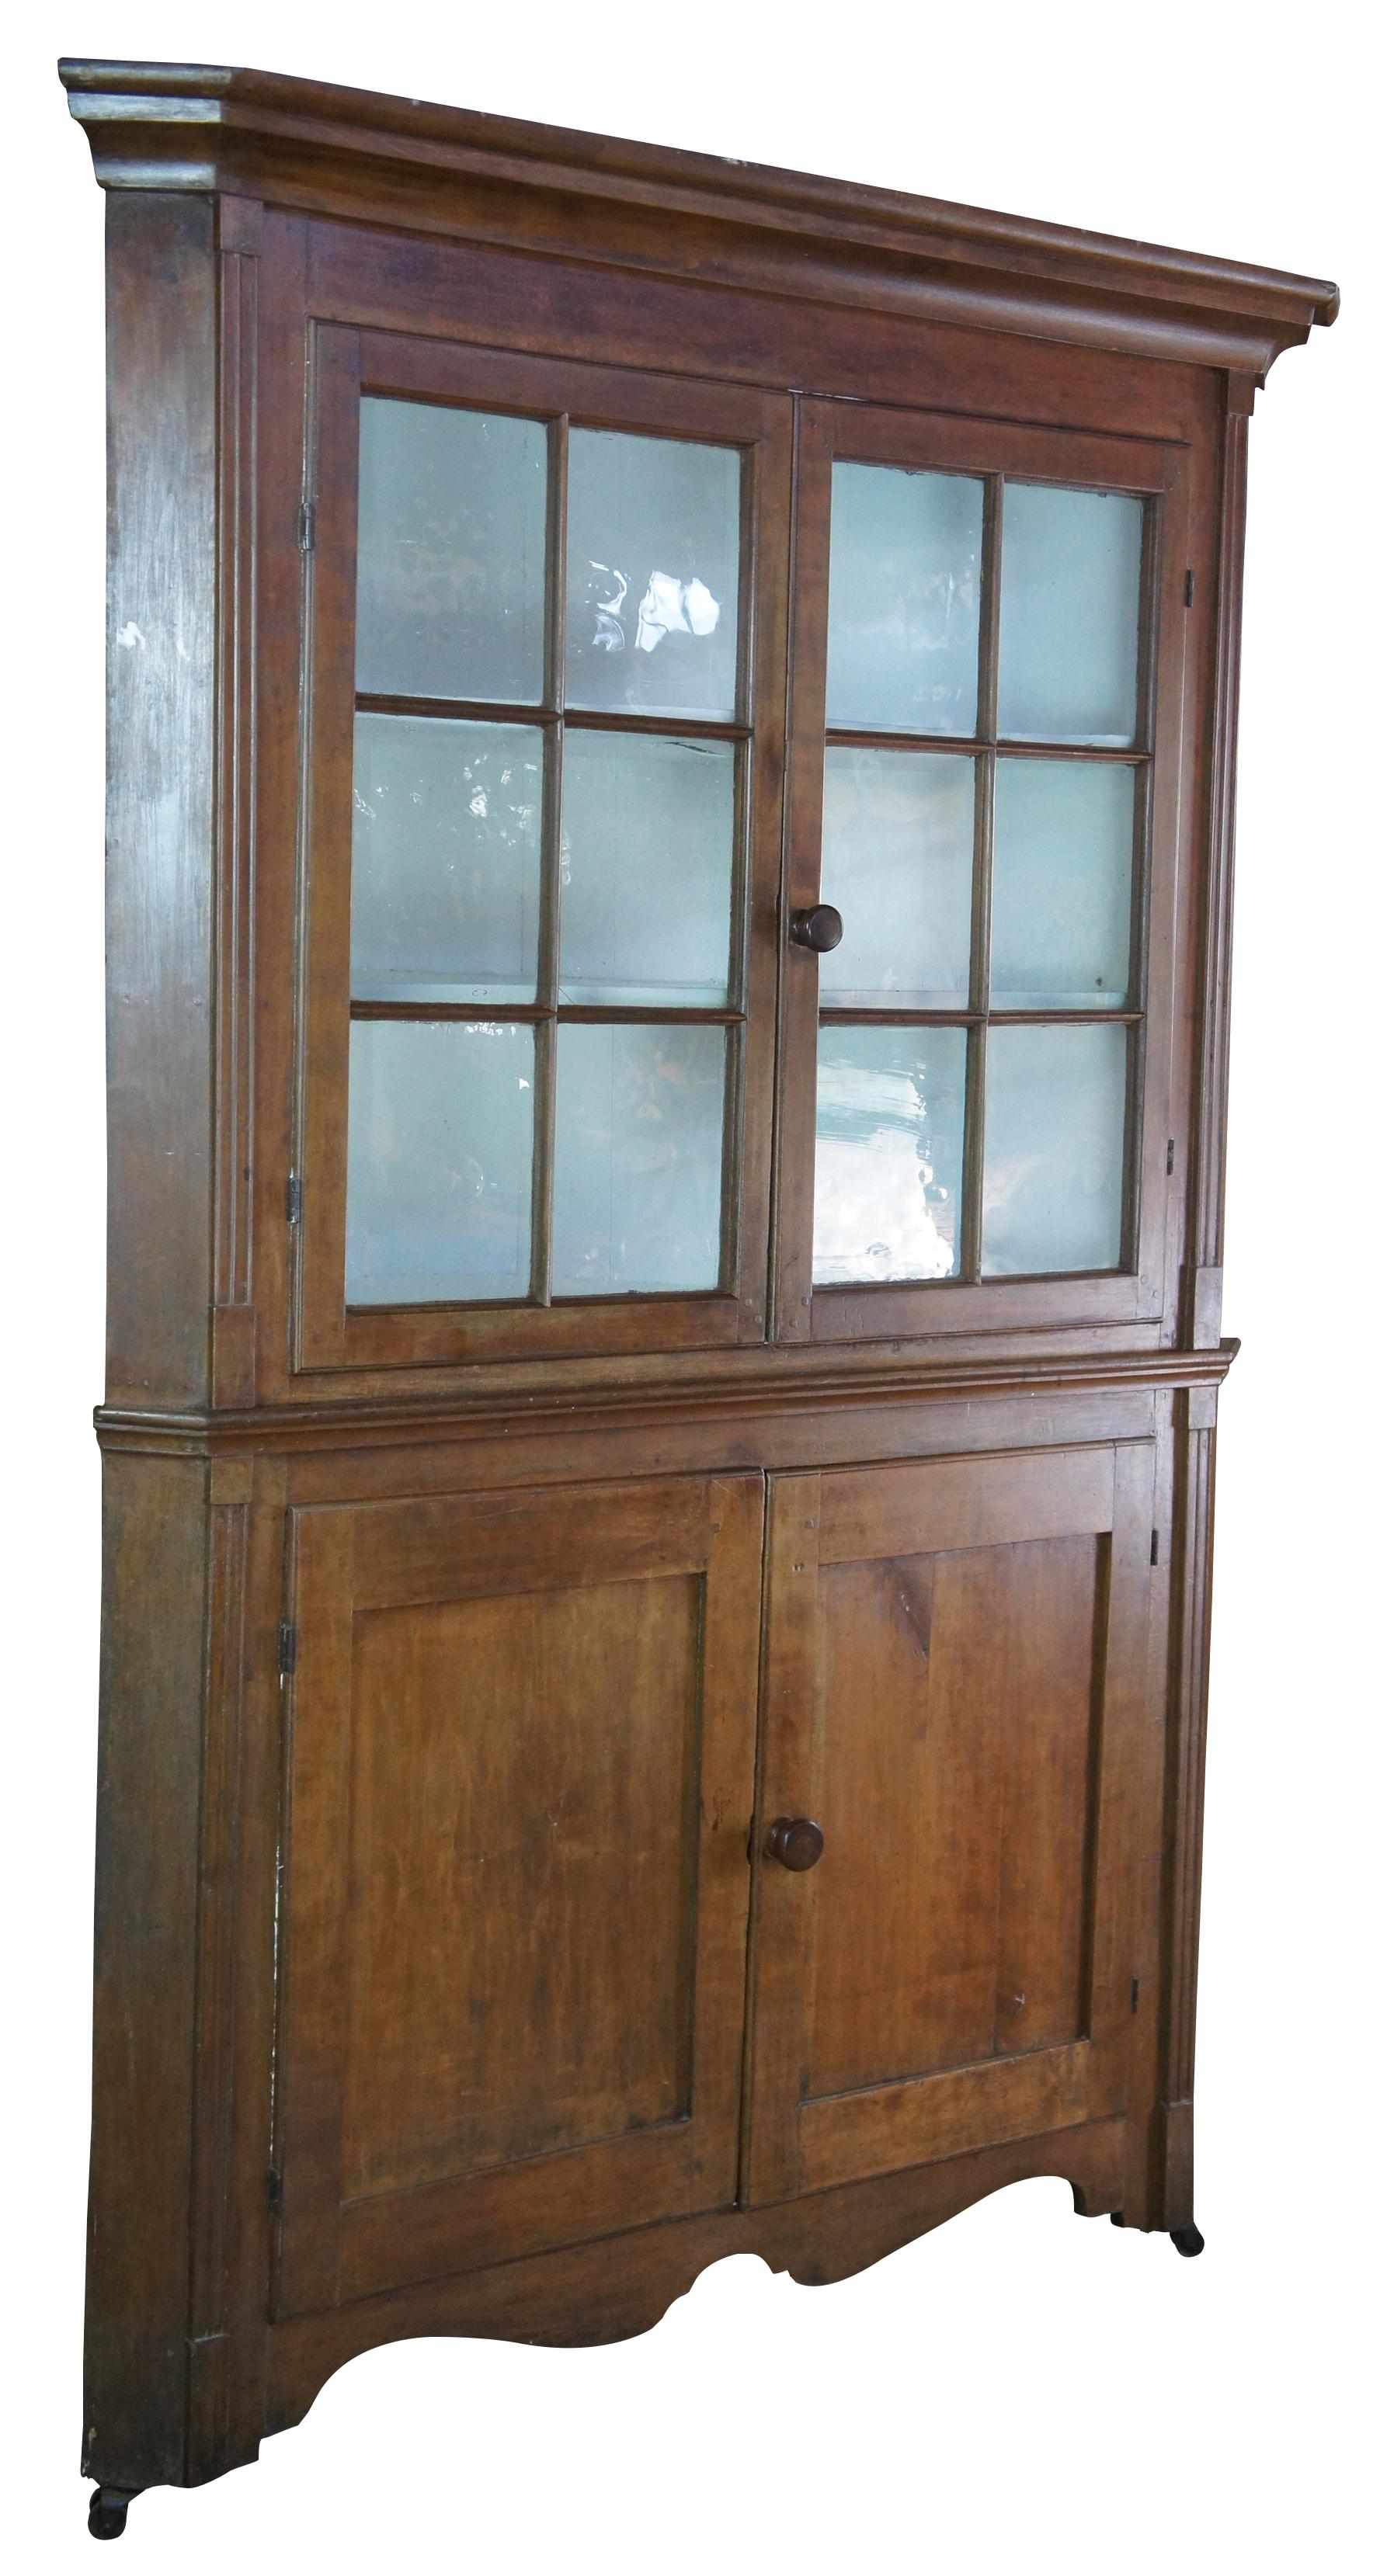 A stately late 18th Century Early American Pennsylvania corner cupboard or cabinet. Made of pine featuring triangular form with serpentine and fluted accents, original glazed wavy glass doors and double casters.
 